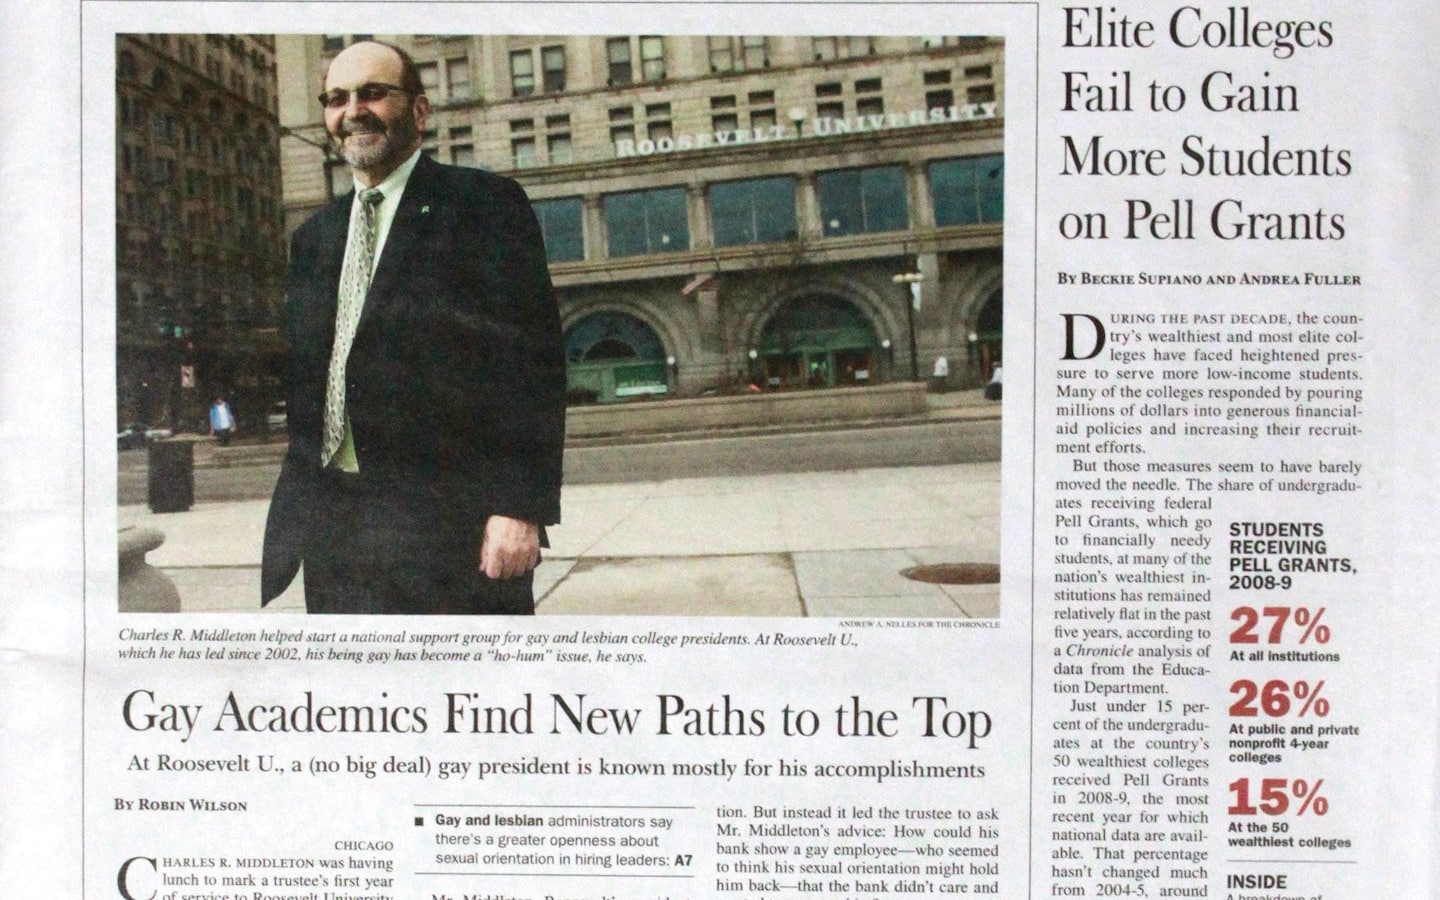 Roosevelt University president Chuck Middleton, featured in The Chronicle